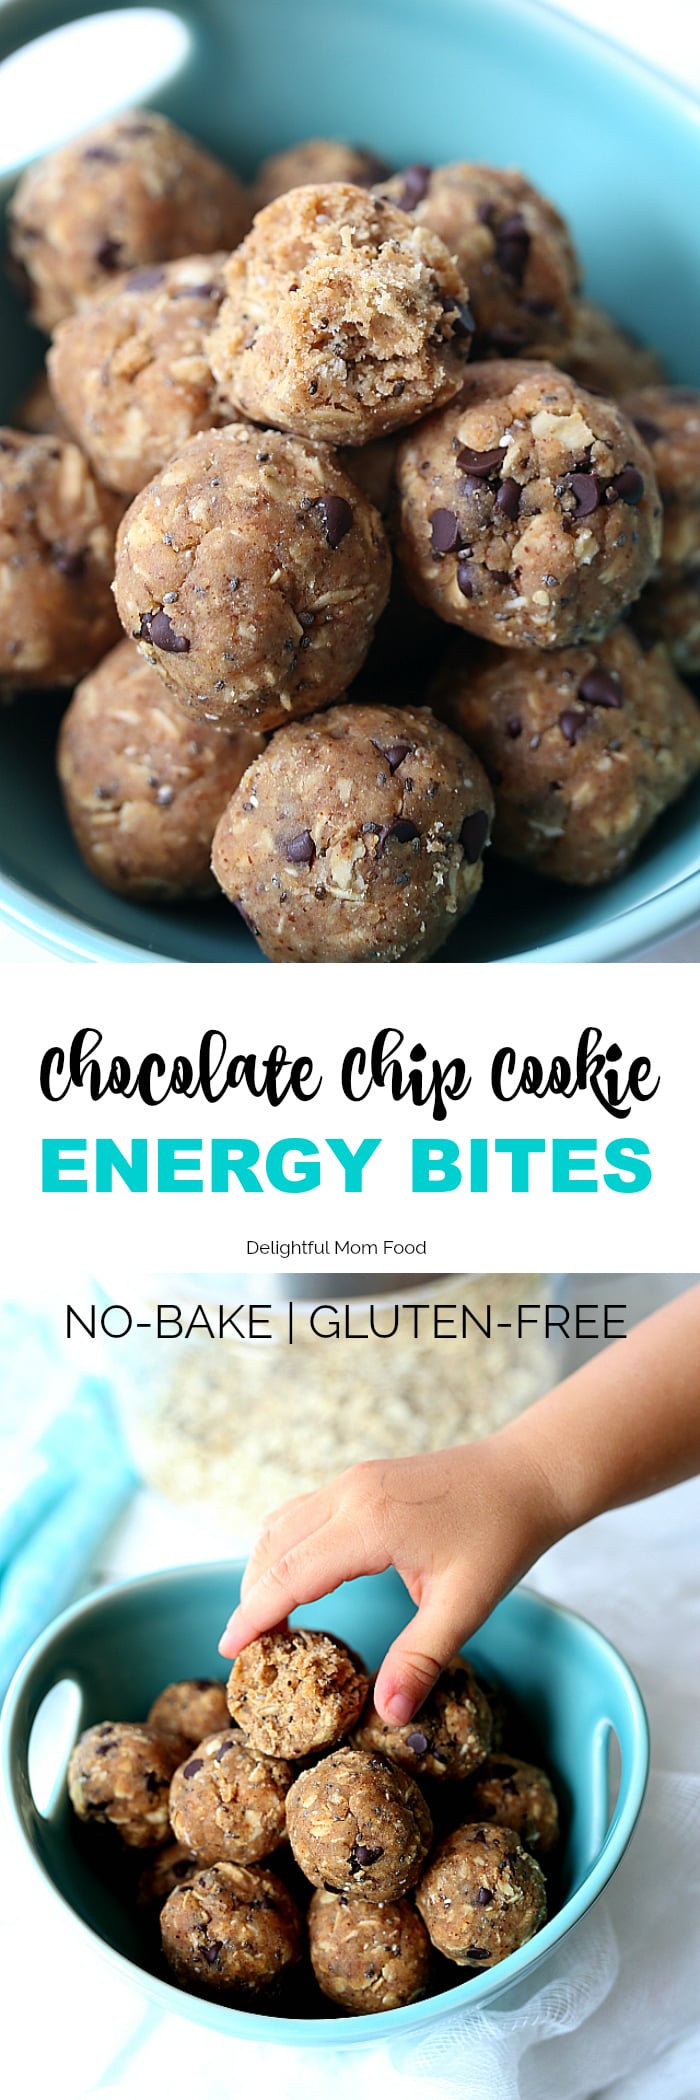 The easiest chocolate chip cookies! These vegan no-bake chocolate chip cookie bites taste like a chocolate chip cookie only made without butter, dairy, gluten and an oven! A tasty energizing dessert or snack ready in less than 10 minutes. #energybites #energyballs #recipe #glutenfree #vegan #healthy #nobake #chocolatechip | delightfulmomfood.com